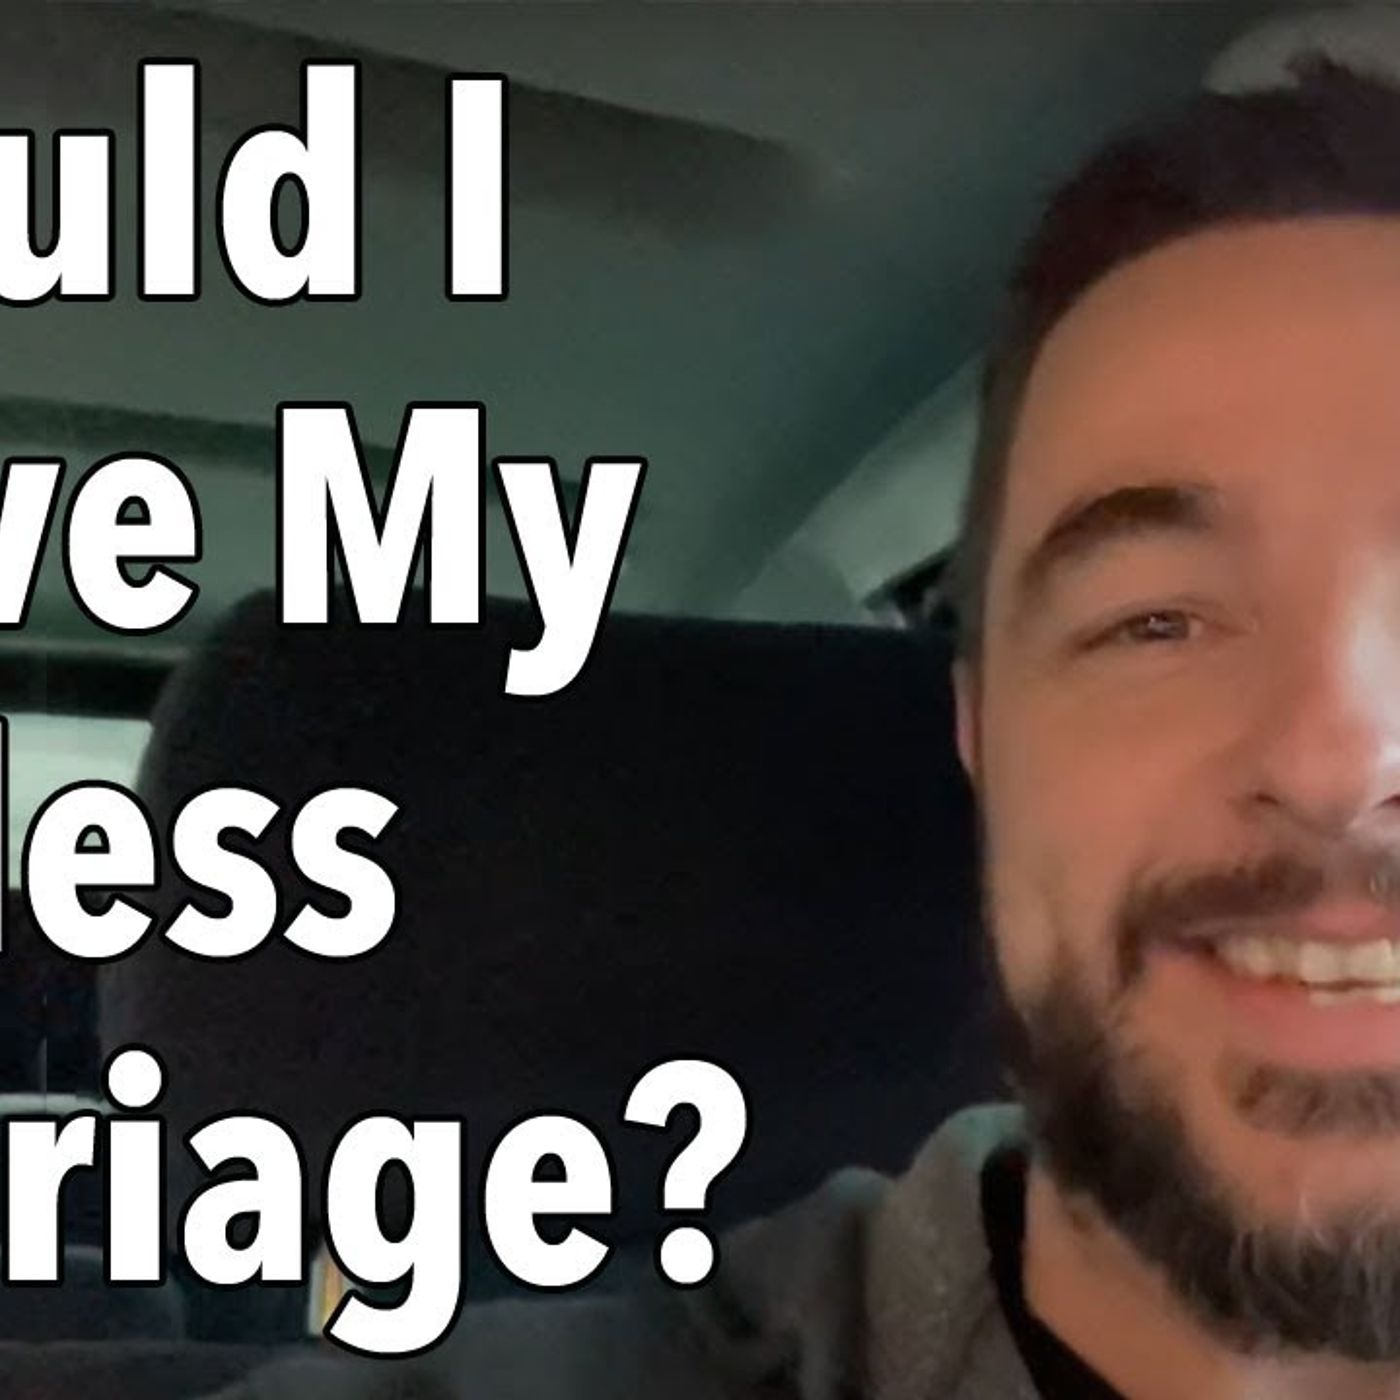 Sexless Marriage Should I Leave?